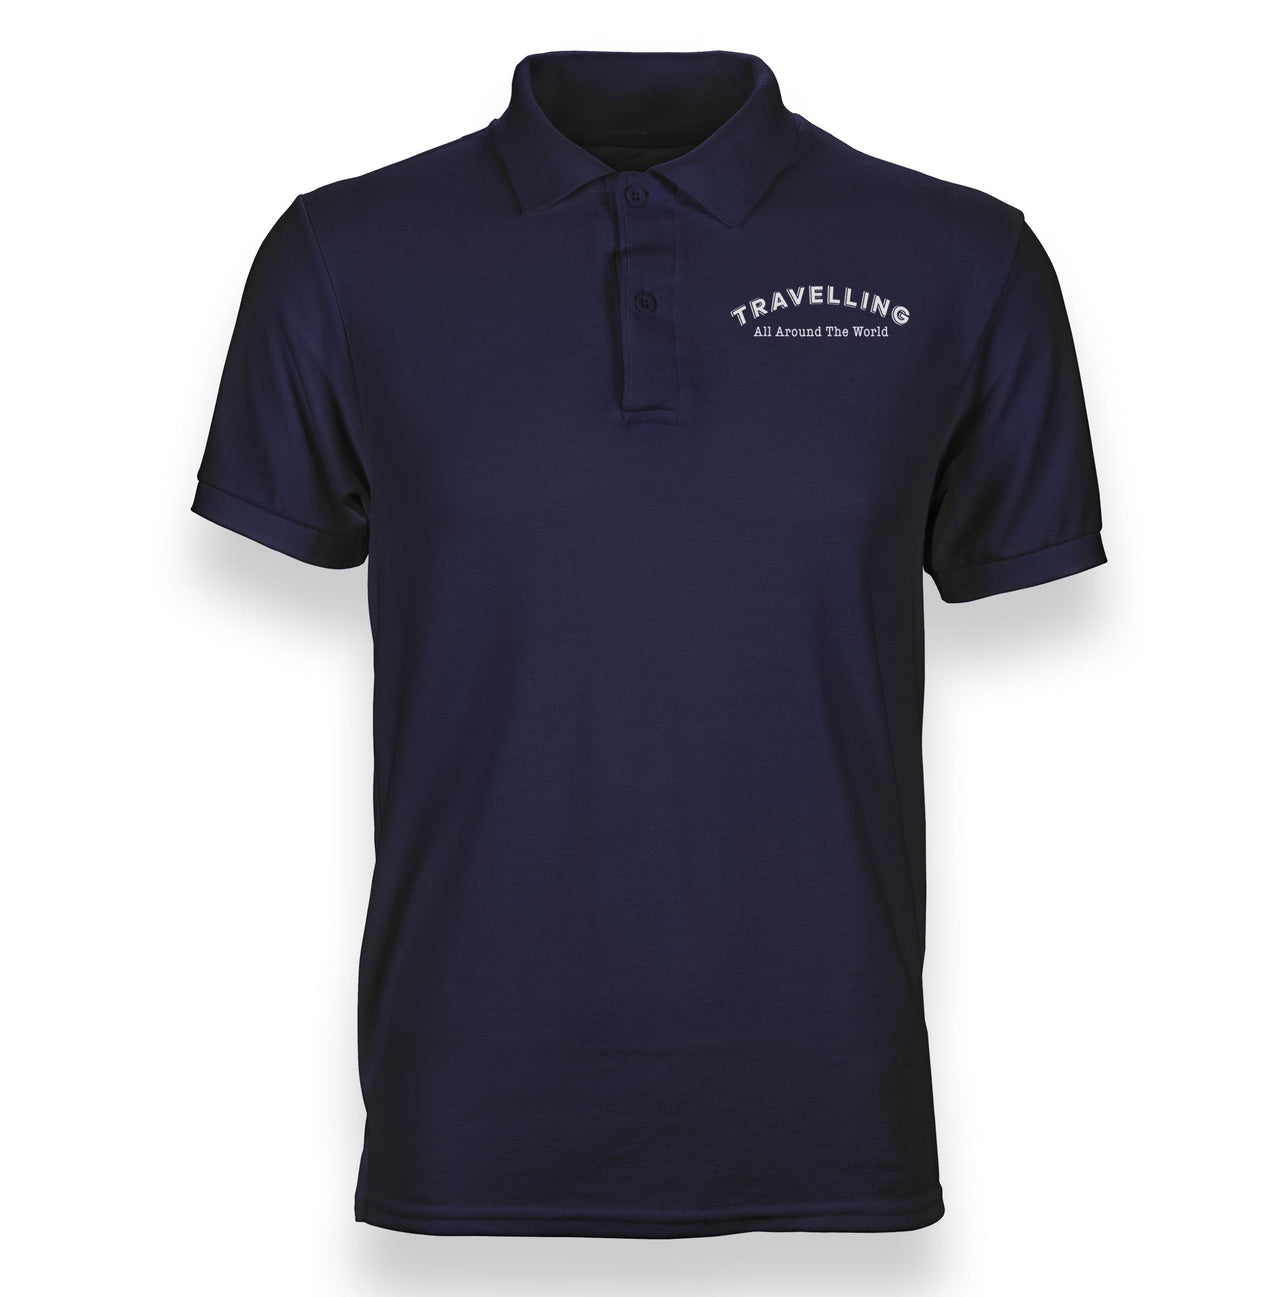 Travelling All Around The World Designed Polo T-Shirts